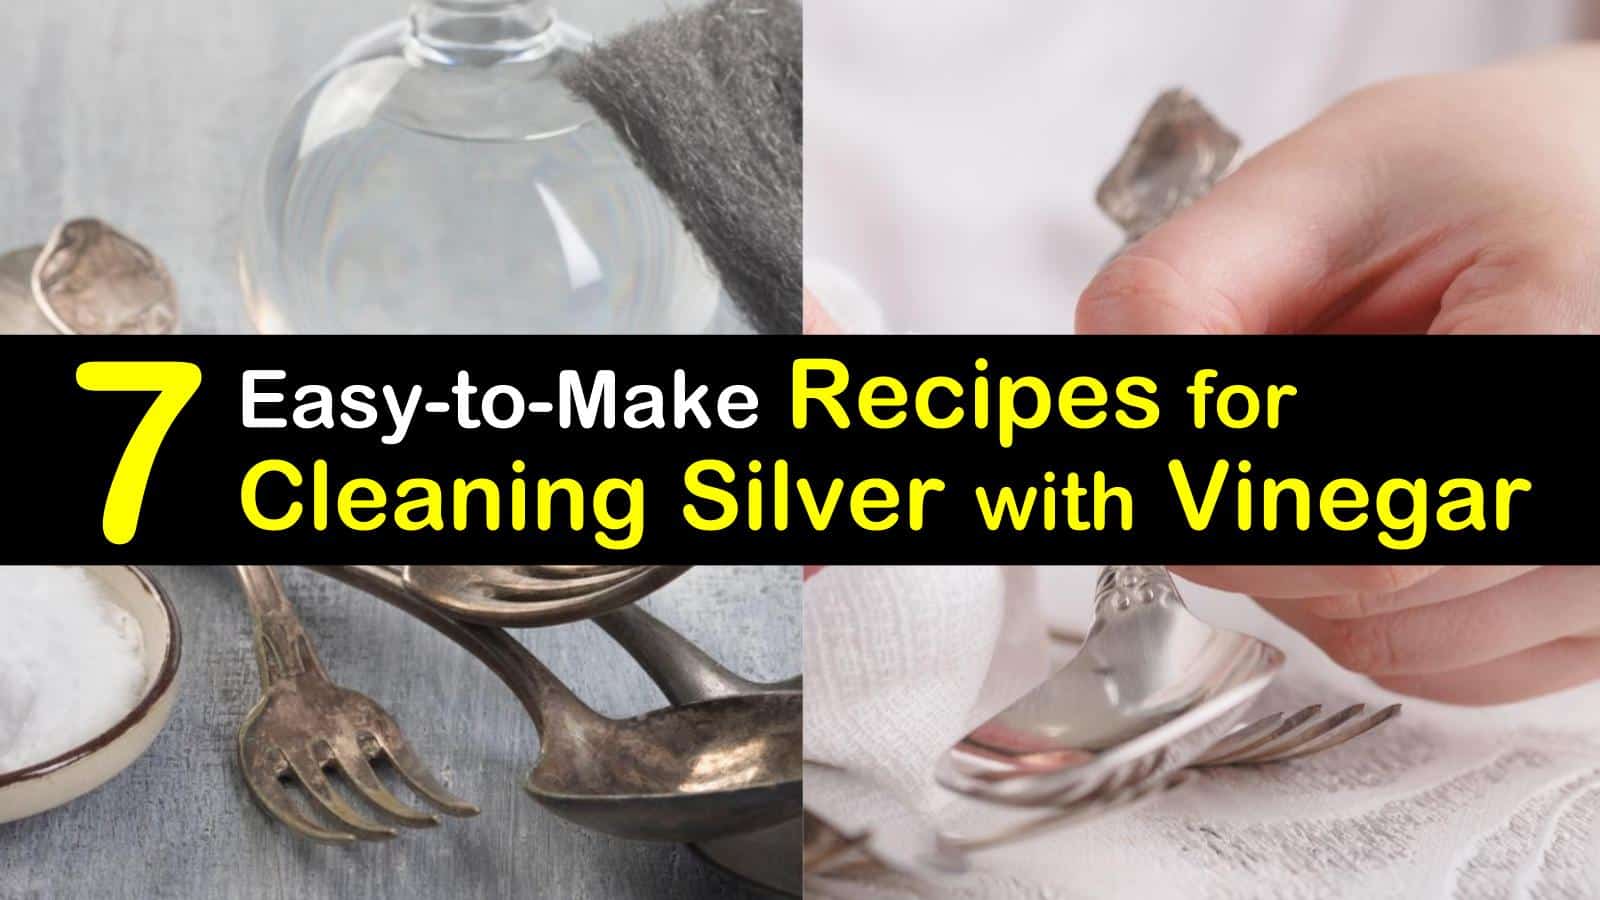 15 Easy-to-Make Recipes to Clean Silver with Vinegar